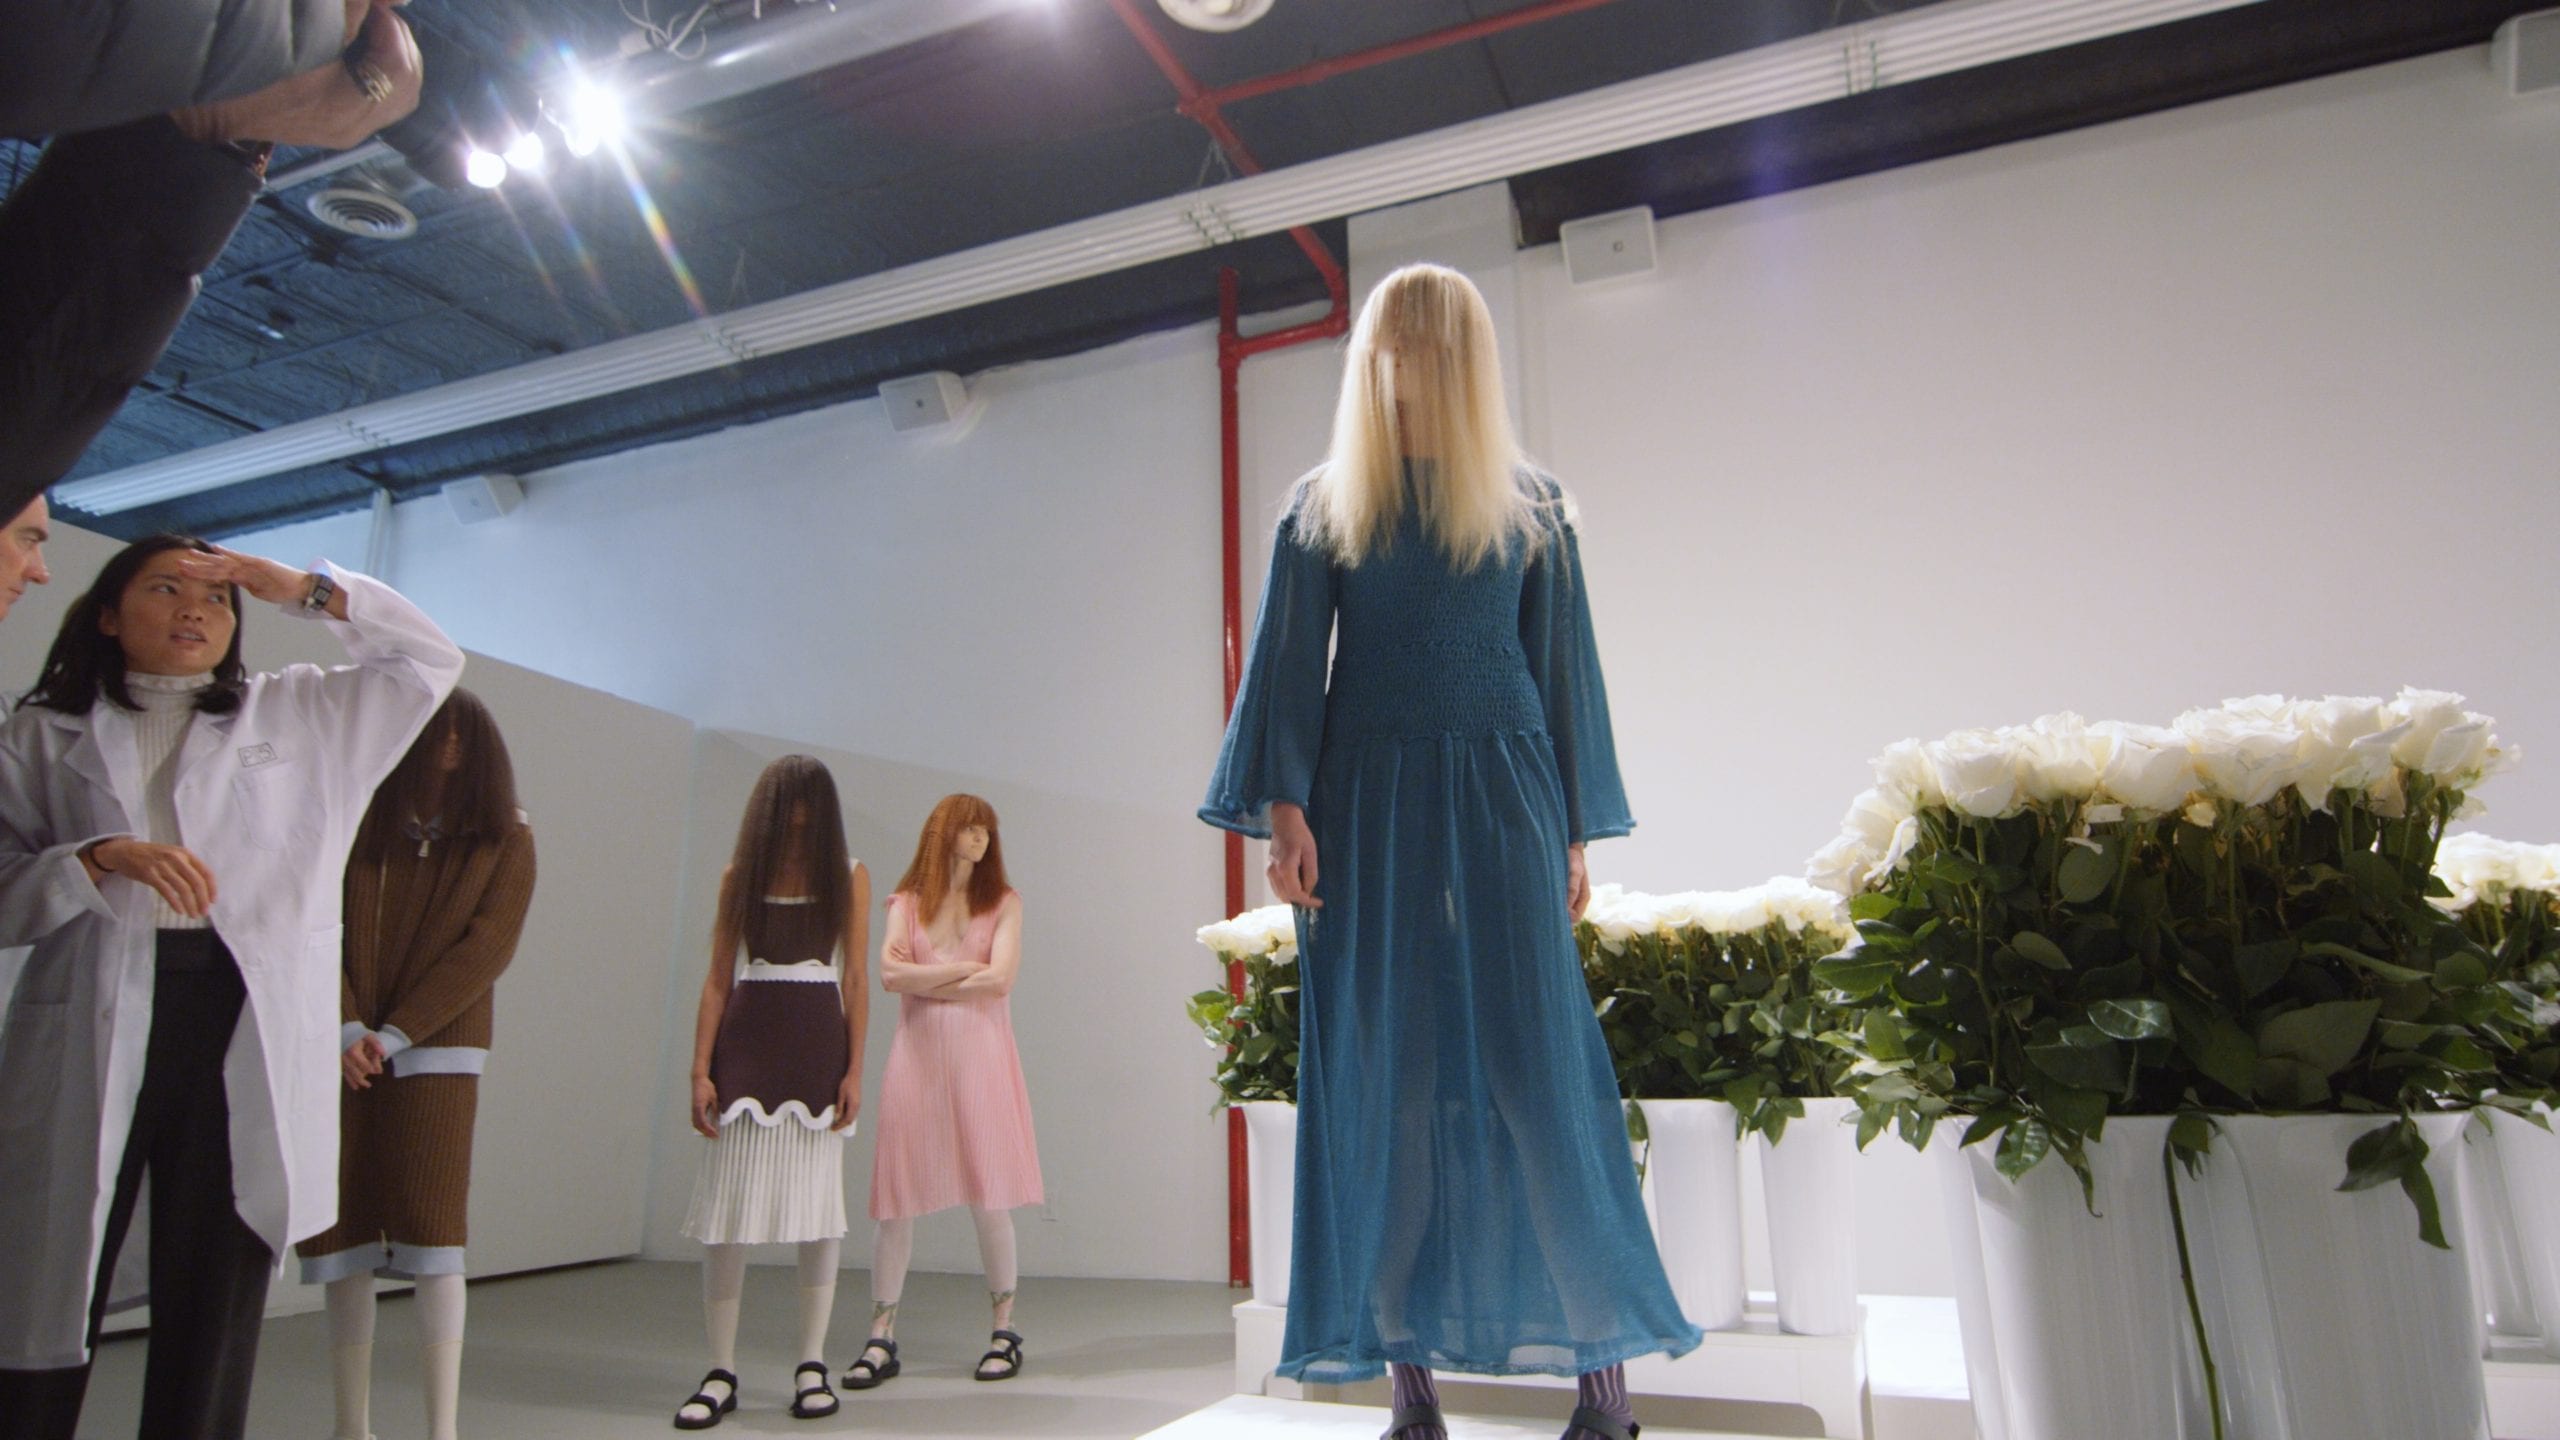 393 NYC hosts PH5 fashion event-Multiple females at a fashion show. One wearing a blue see through dress with long blond hair partially covering face posing for camera.